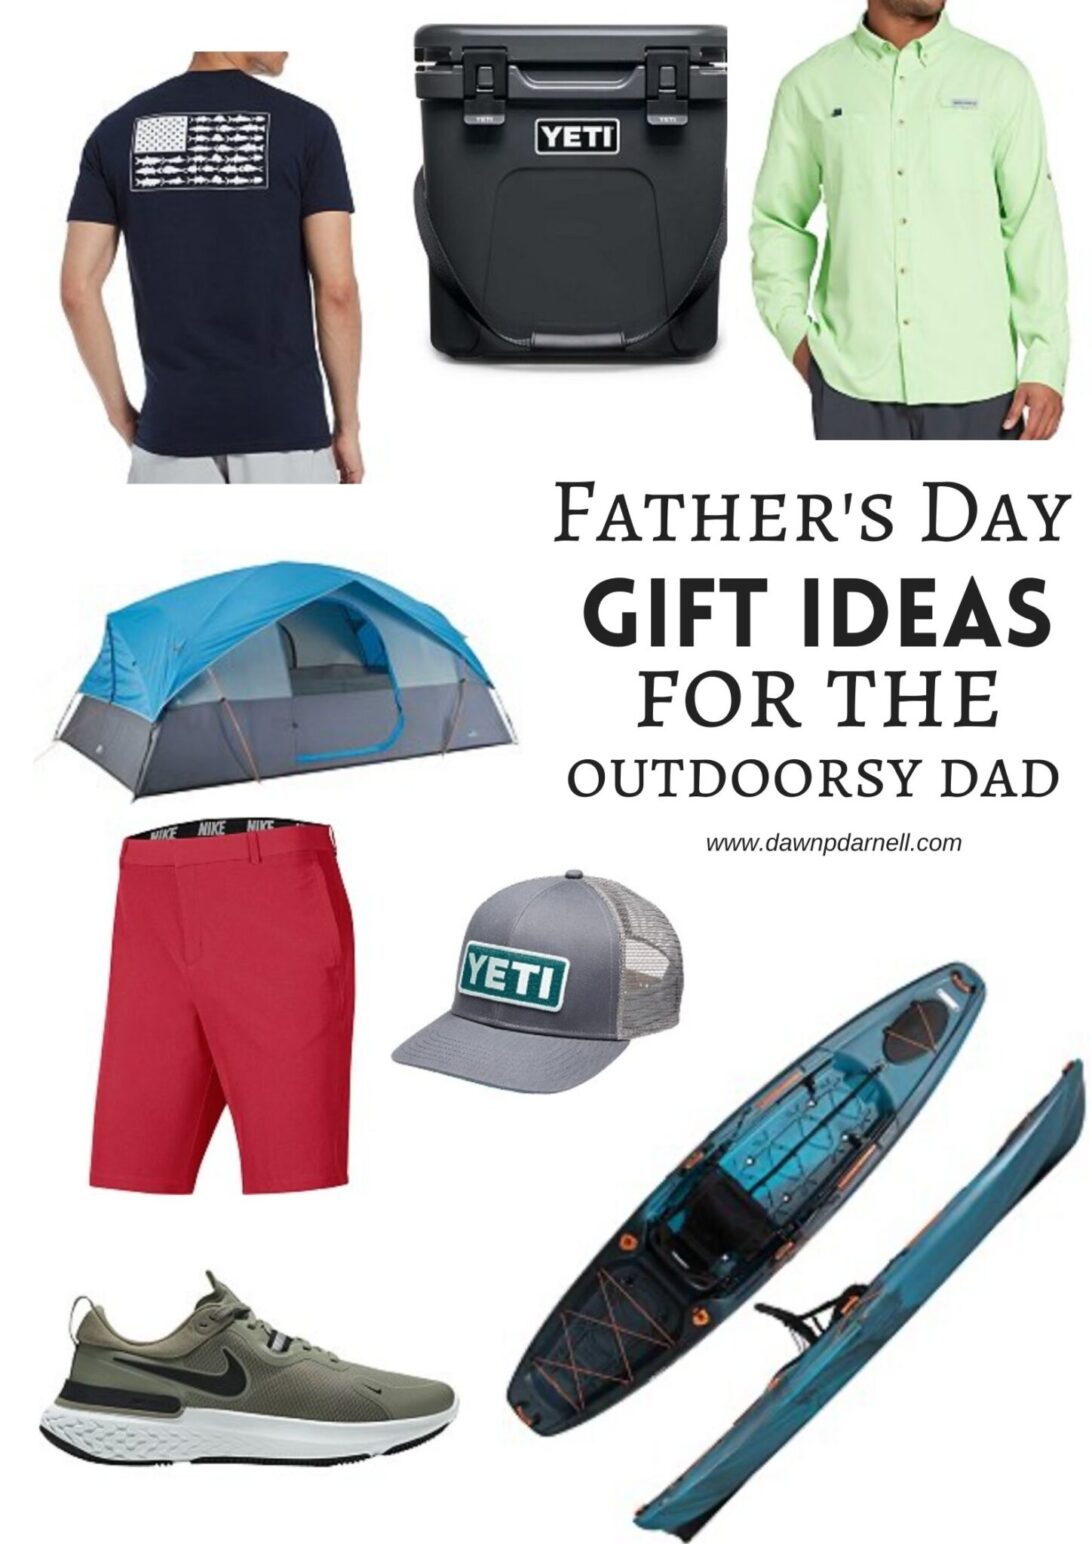 father's day gift ideas, outdoorsy dad, fishing, camping 